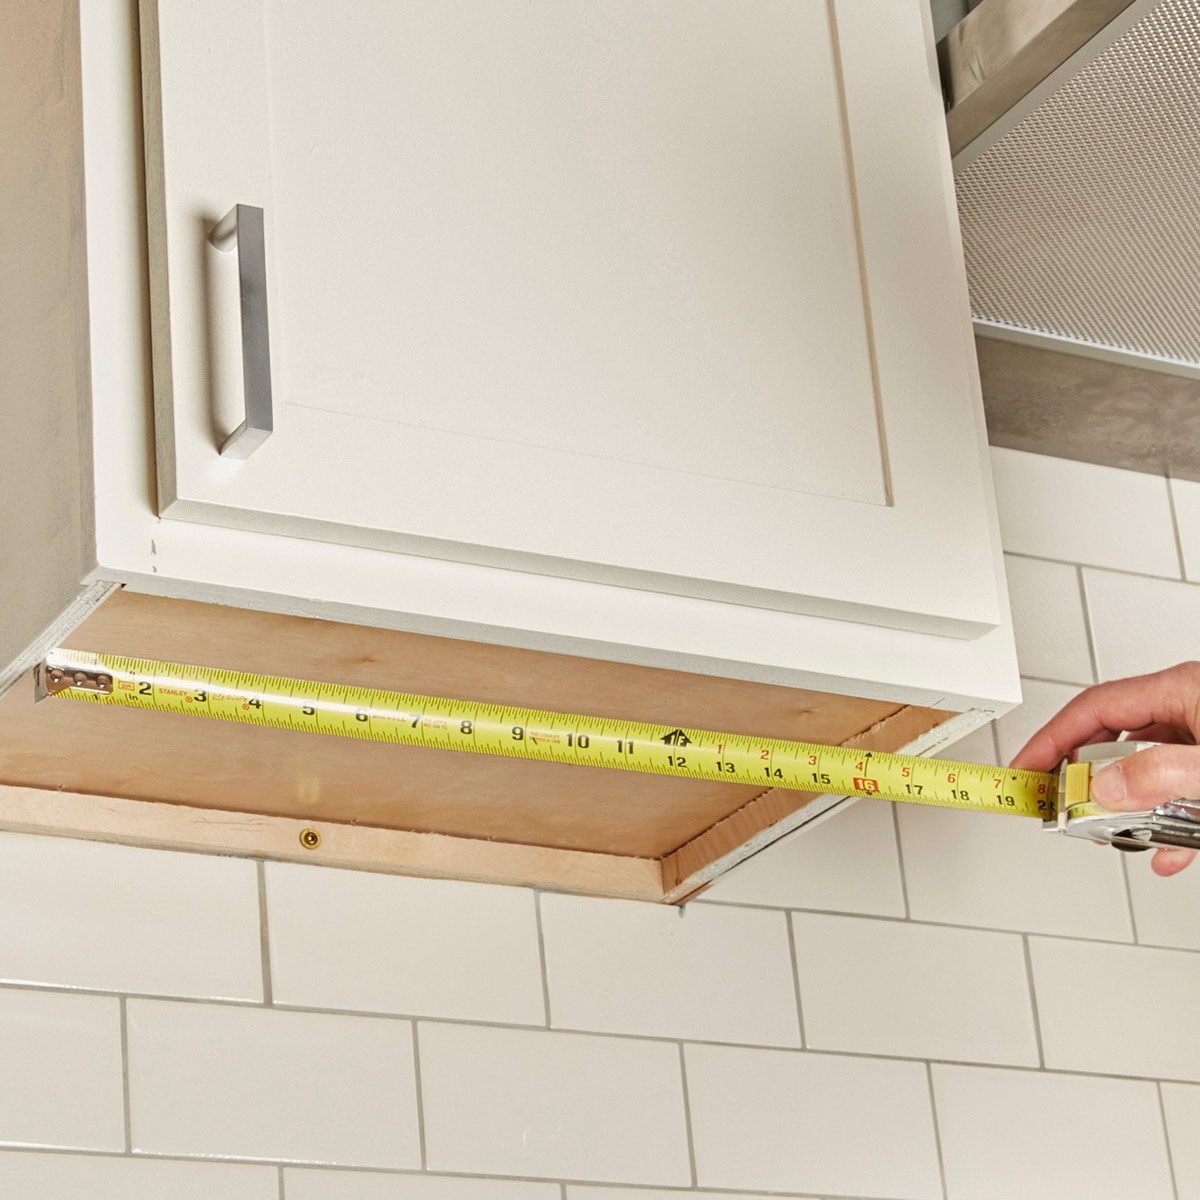 How To Build a Simple Under-Cabinet Drawer for More Kitchen